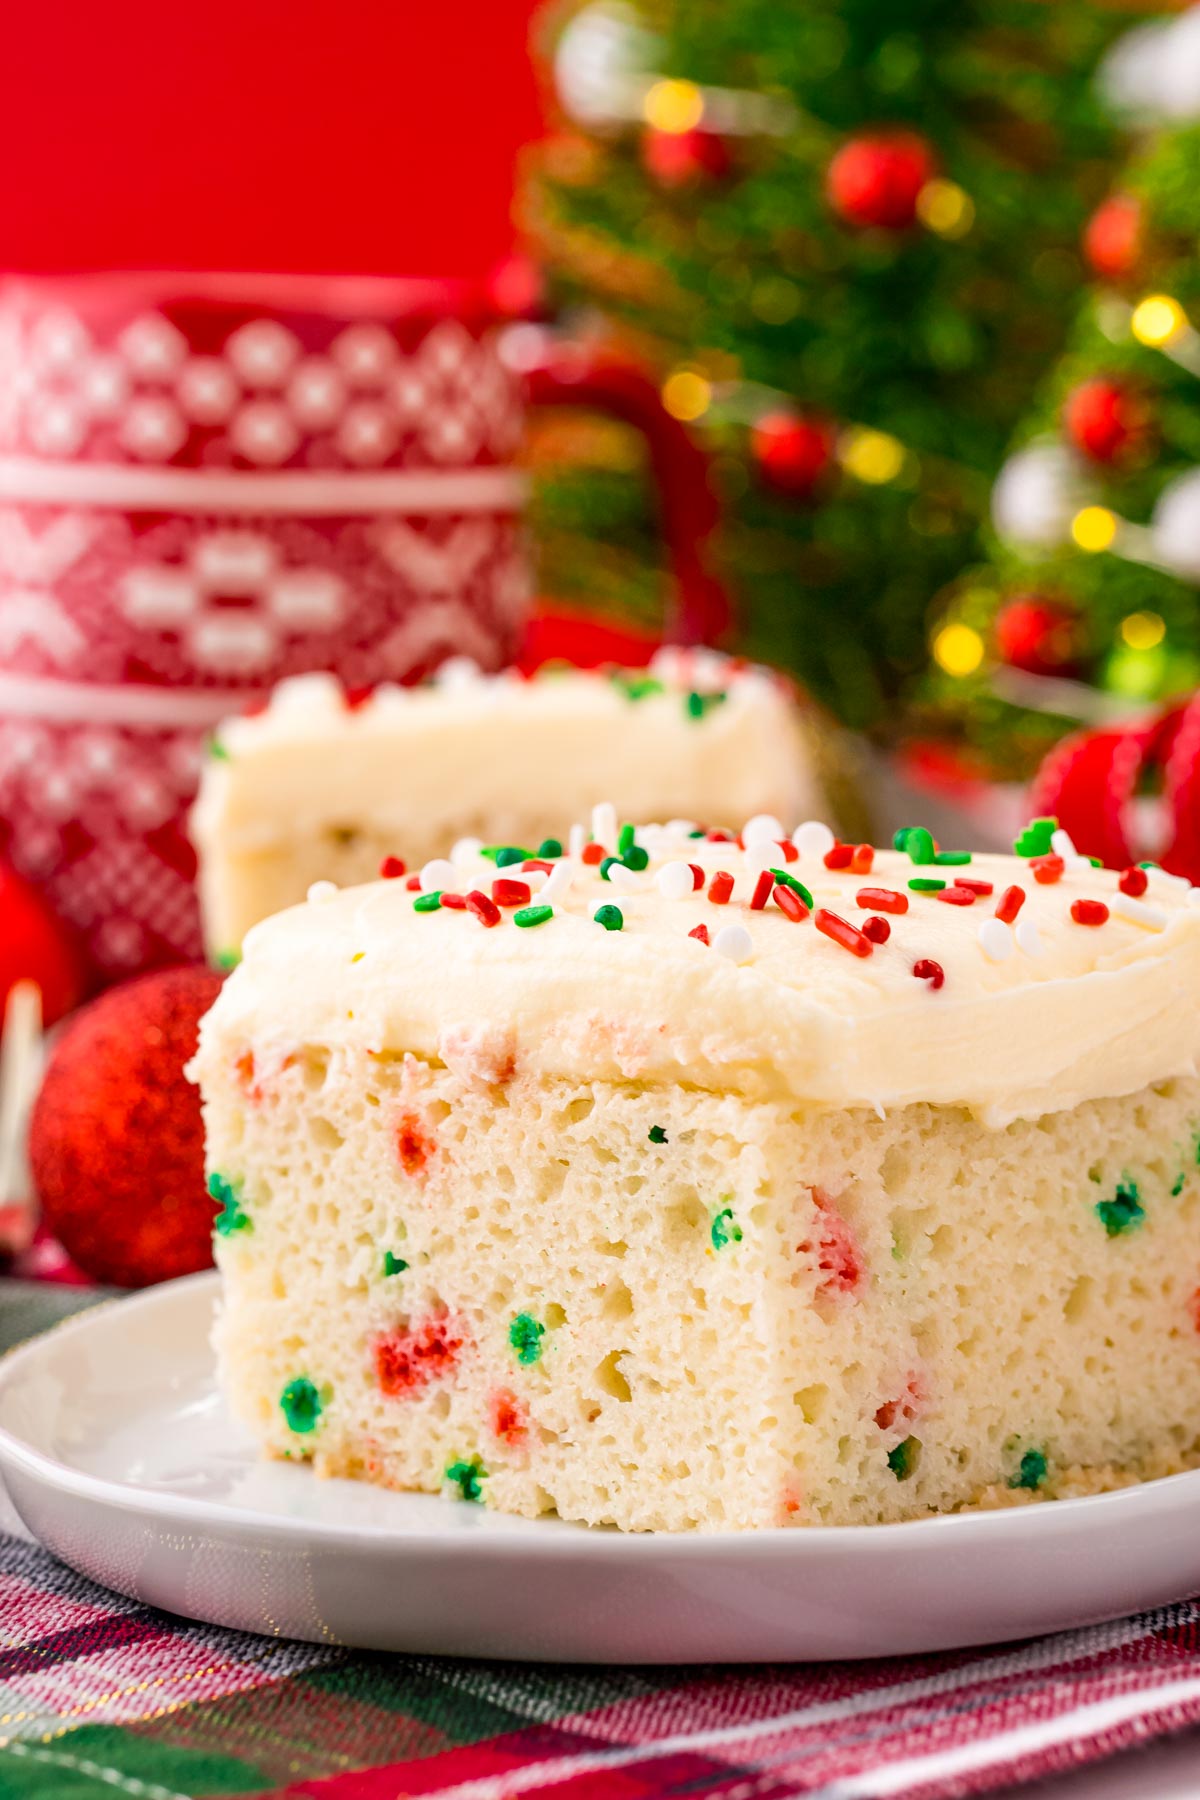 Christmas Party Supplies - Sprinkles, Christmas Baking Supplies, Ideas